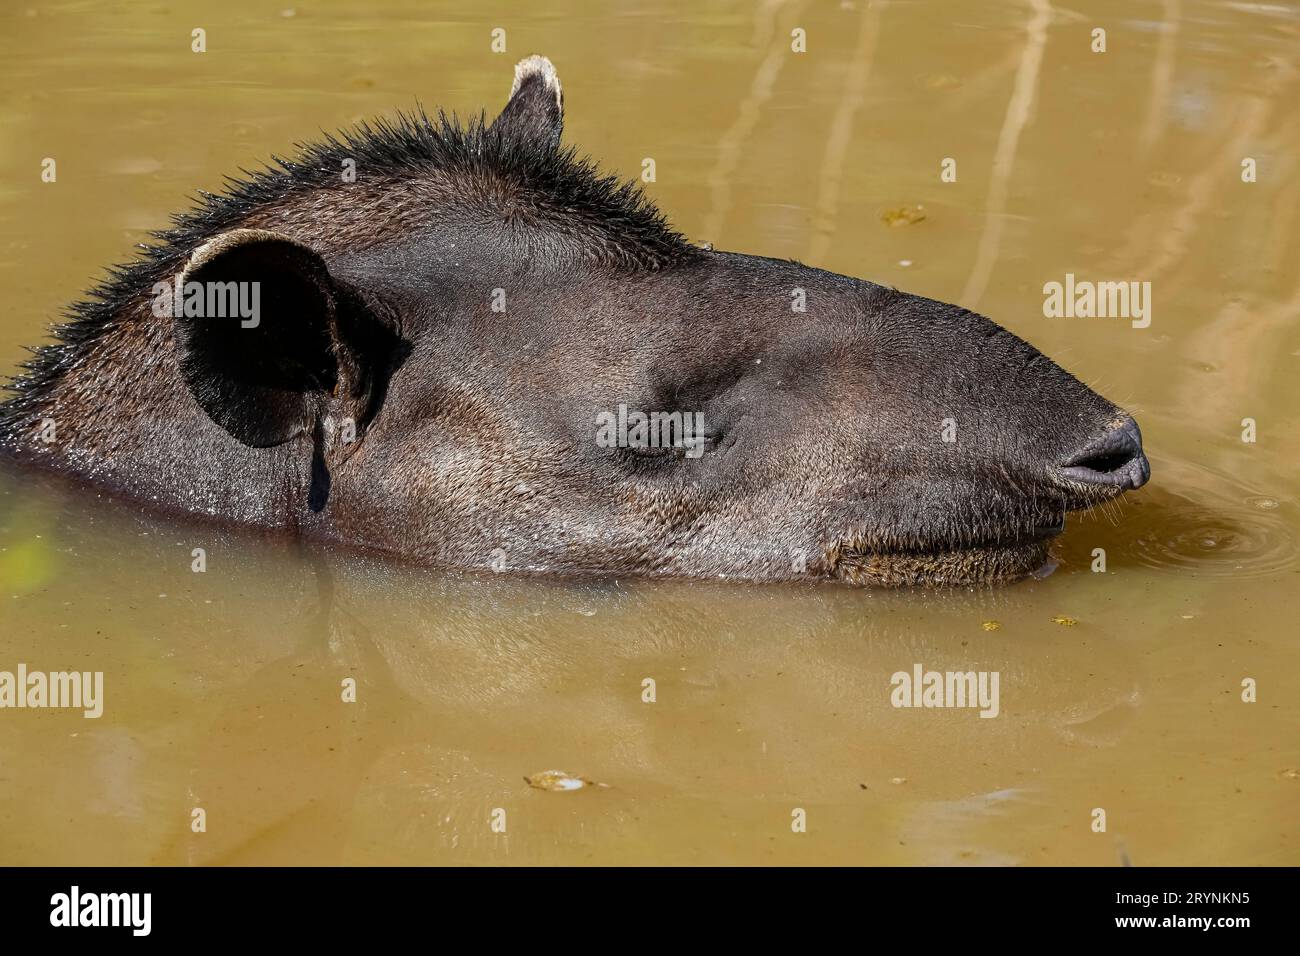 Close-up of a Tapir head in a muddy pond, side view face, Pantanal Wetlands, Mato Grosso, Brazi Stock Photo